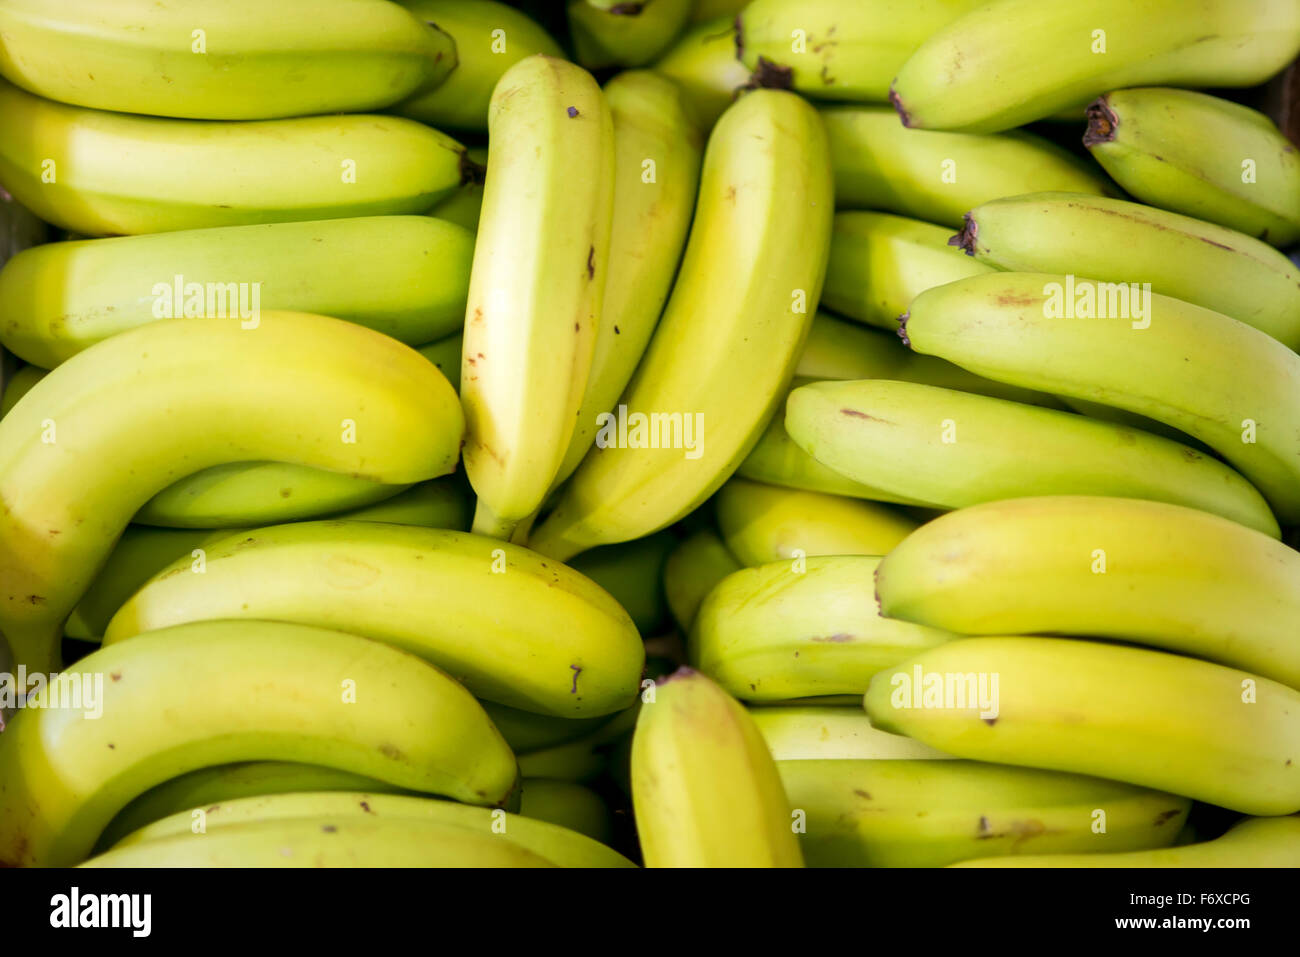 Bunch of Bananas on Red Background. Fresh Organic Banana, Fresh Bananas on  Kitchen Table Stock Image - Image of bkack, container: 62492349